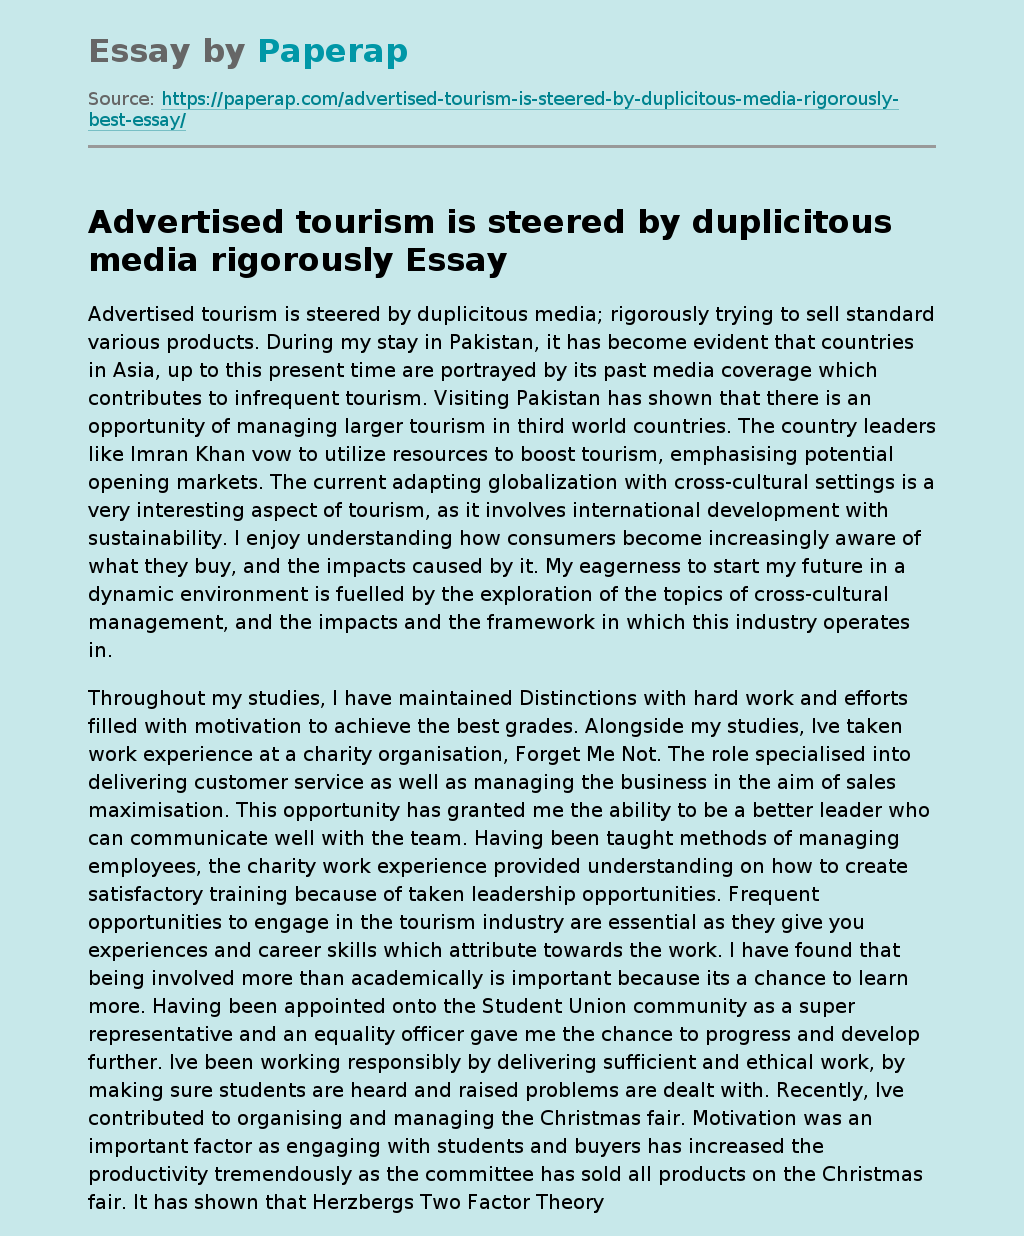 Advertised tourism is steered by duplicitous media rigorously